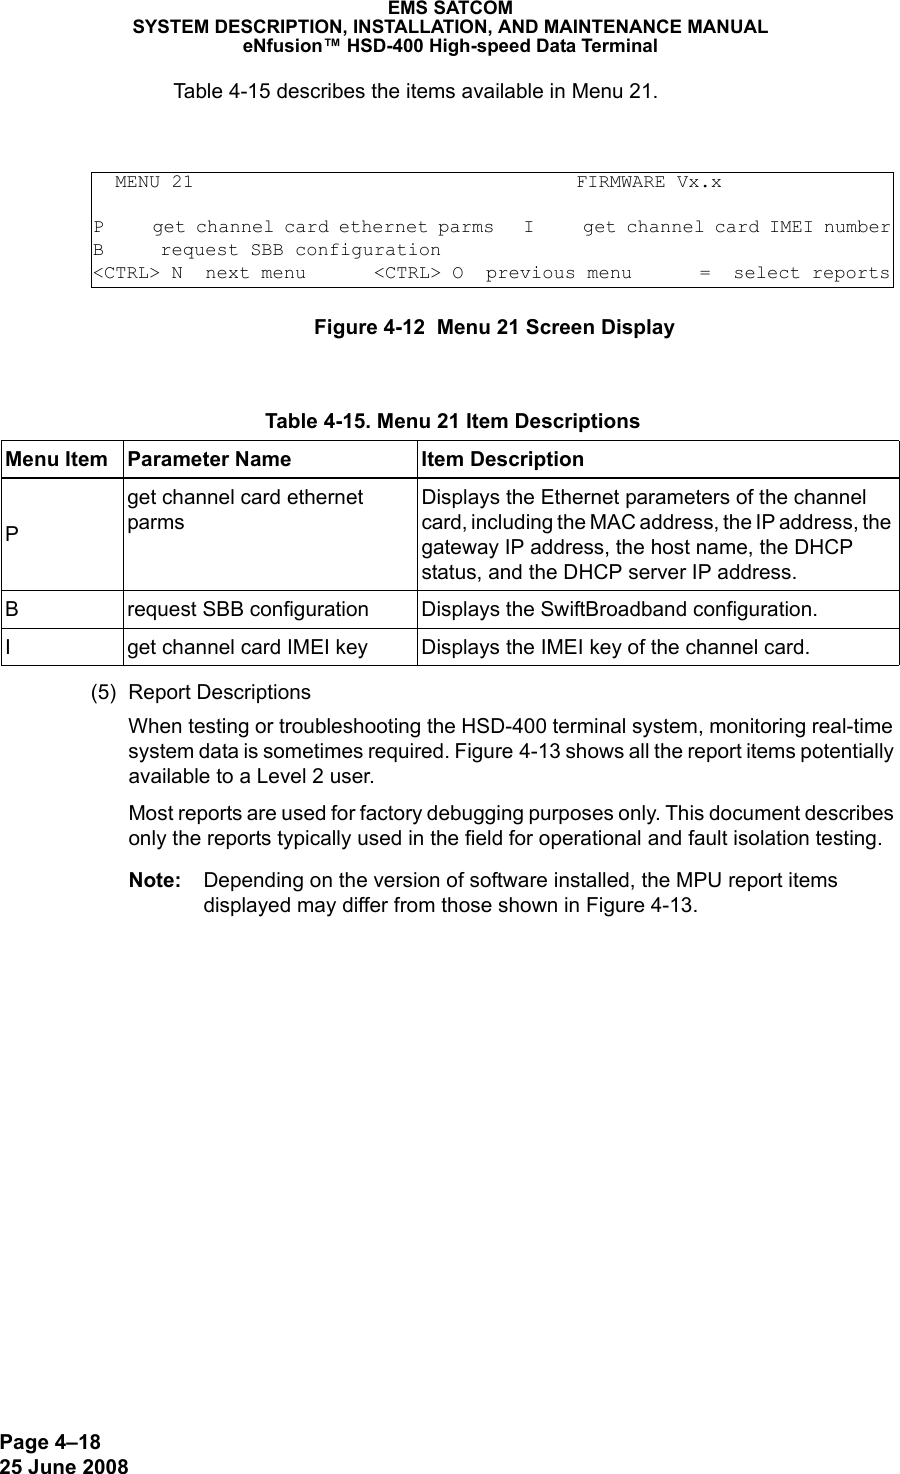 Page 4–1825 June 2008EMS SATCOMSYSTEM DESCRIPTION, INSTALLATION, AND MAINTENANCE MANUALeNfusion™ HSD-400 High-speed Data TerminalTable 4-15 describes the items available in Menu 21.Figure 4-12  Menu 21 Screen Display(5) Report DescriptionsWhen testing or troubleshooting the HSD-400 terminal system, monitoring real-time system data is sometimes required. Figure 4-13 shows all the report items potentially available to a Level 2 user.Most reports are used for factory debugging purposes only. This document describes only the reports typically used in the field for operational and fault isolation testing. Note: Depending on the version of software installed, the MPU report items displayed may differ from those shown in Figure 4-13.  MENU 21                                  FIRMWARE Vx.xP     get channel card ethernet parms   I     get channel card IMEI numberB     request SBB configuration         &lt;CTRL&gt; N  next menu      &lt;CTRL&gt; O  previous menu      =  select reports Table 4-15. Menu 21 Item DescriptionsMenu Item Parameter Name Item DescriptionPget channel card ethernet parmsDisplays the Ethernet parameters of the channel card, including the MAC address, the IP address, the gateway IP address, the host name, the DHCP status, and the DHCP server IP address.B request SBB configuration Displays the SwiftBroadband configuration.I get channel card IMEI key Displays the IMEI key of the channel card.